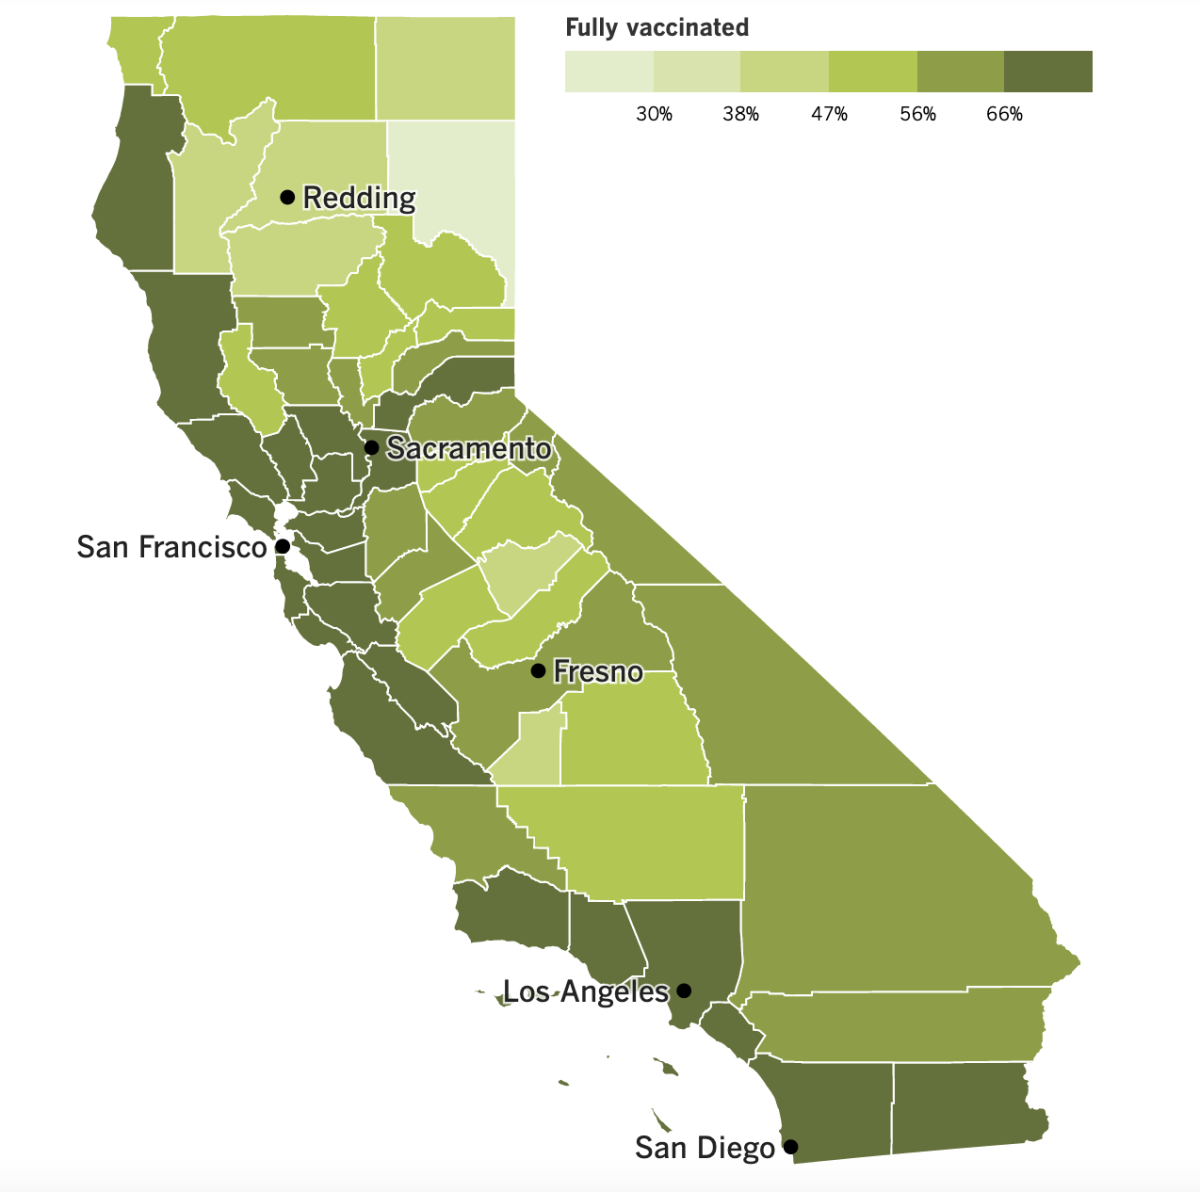 A map showing California's COVID-19 vaccination progress by county as of June 7, 2022.